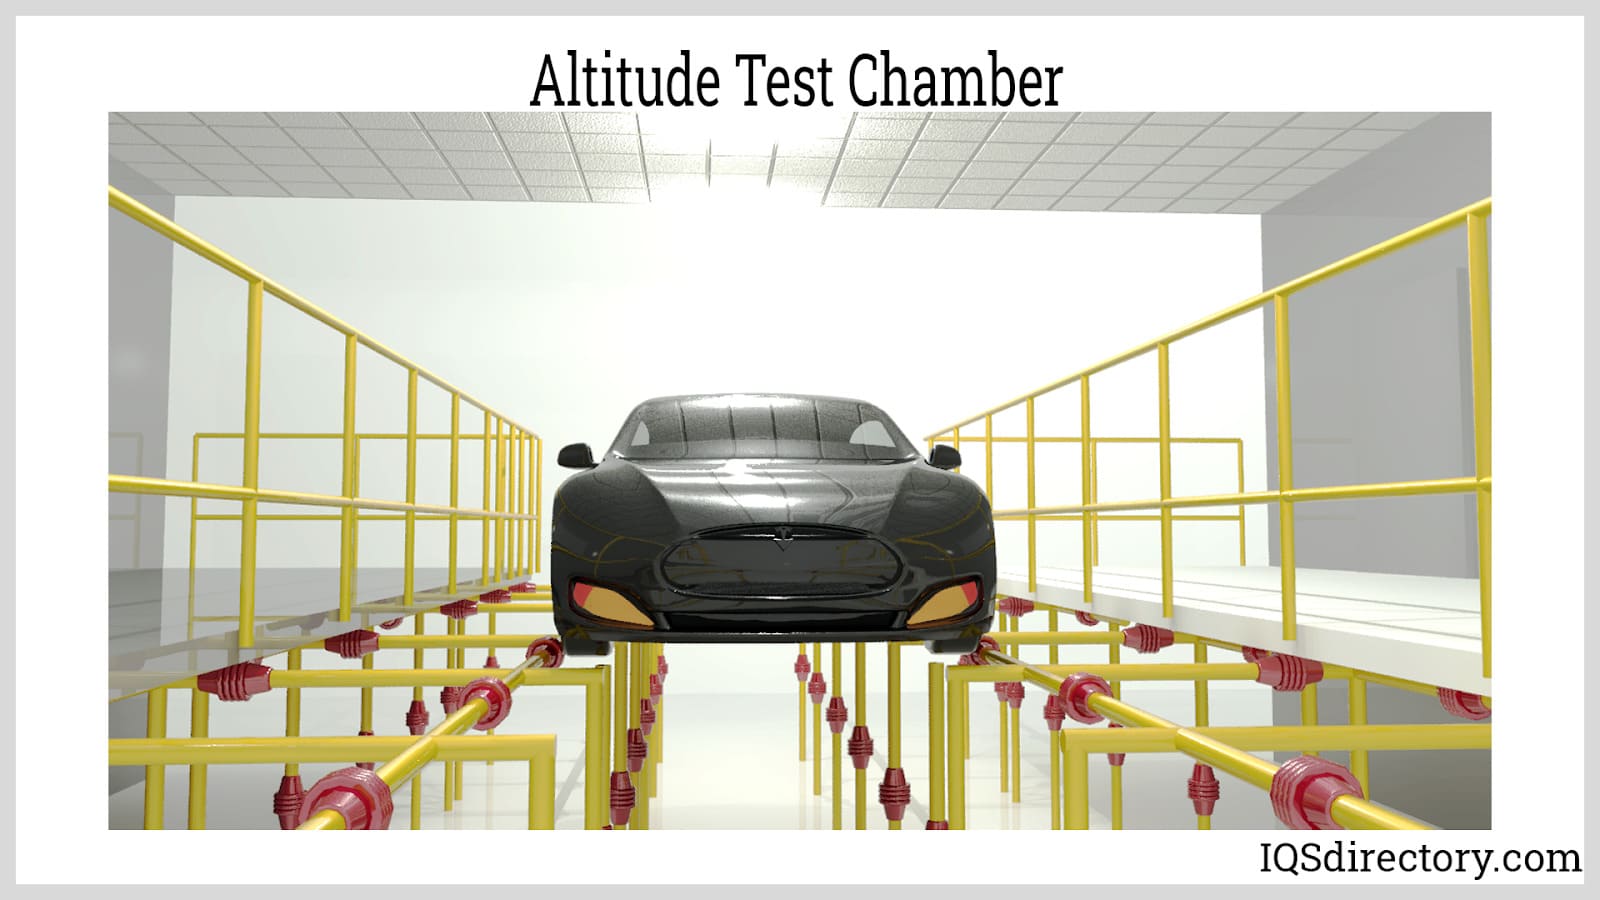 Altitude Test Chamber